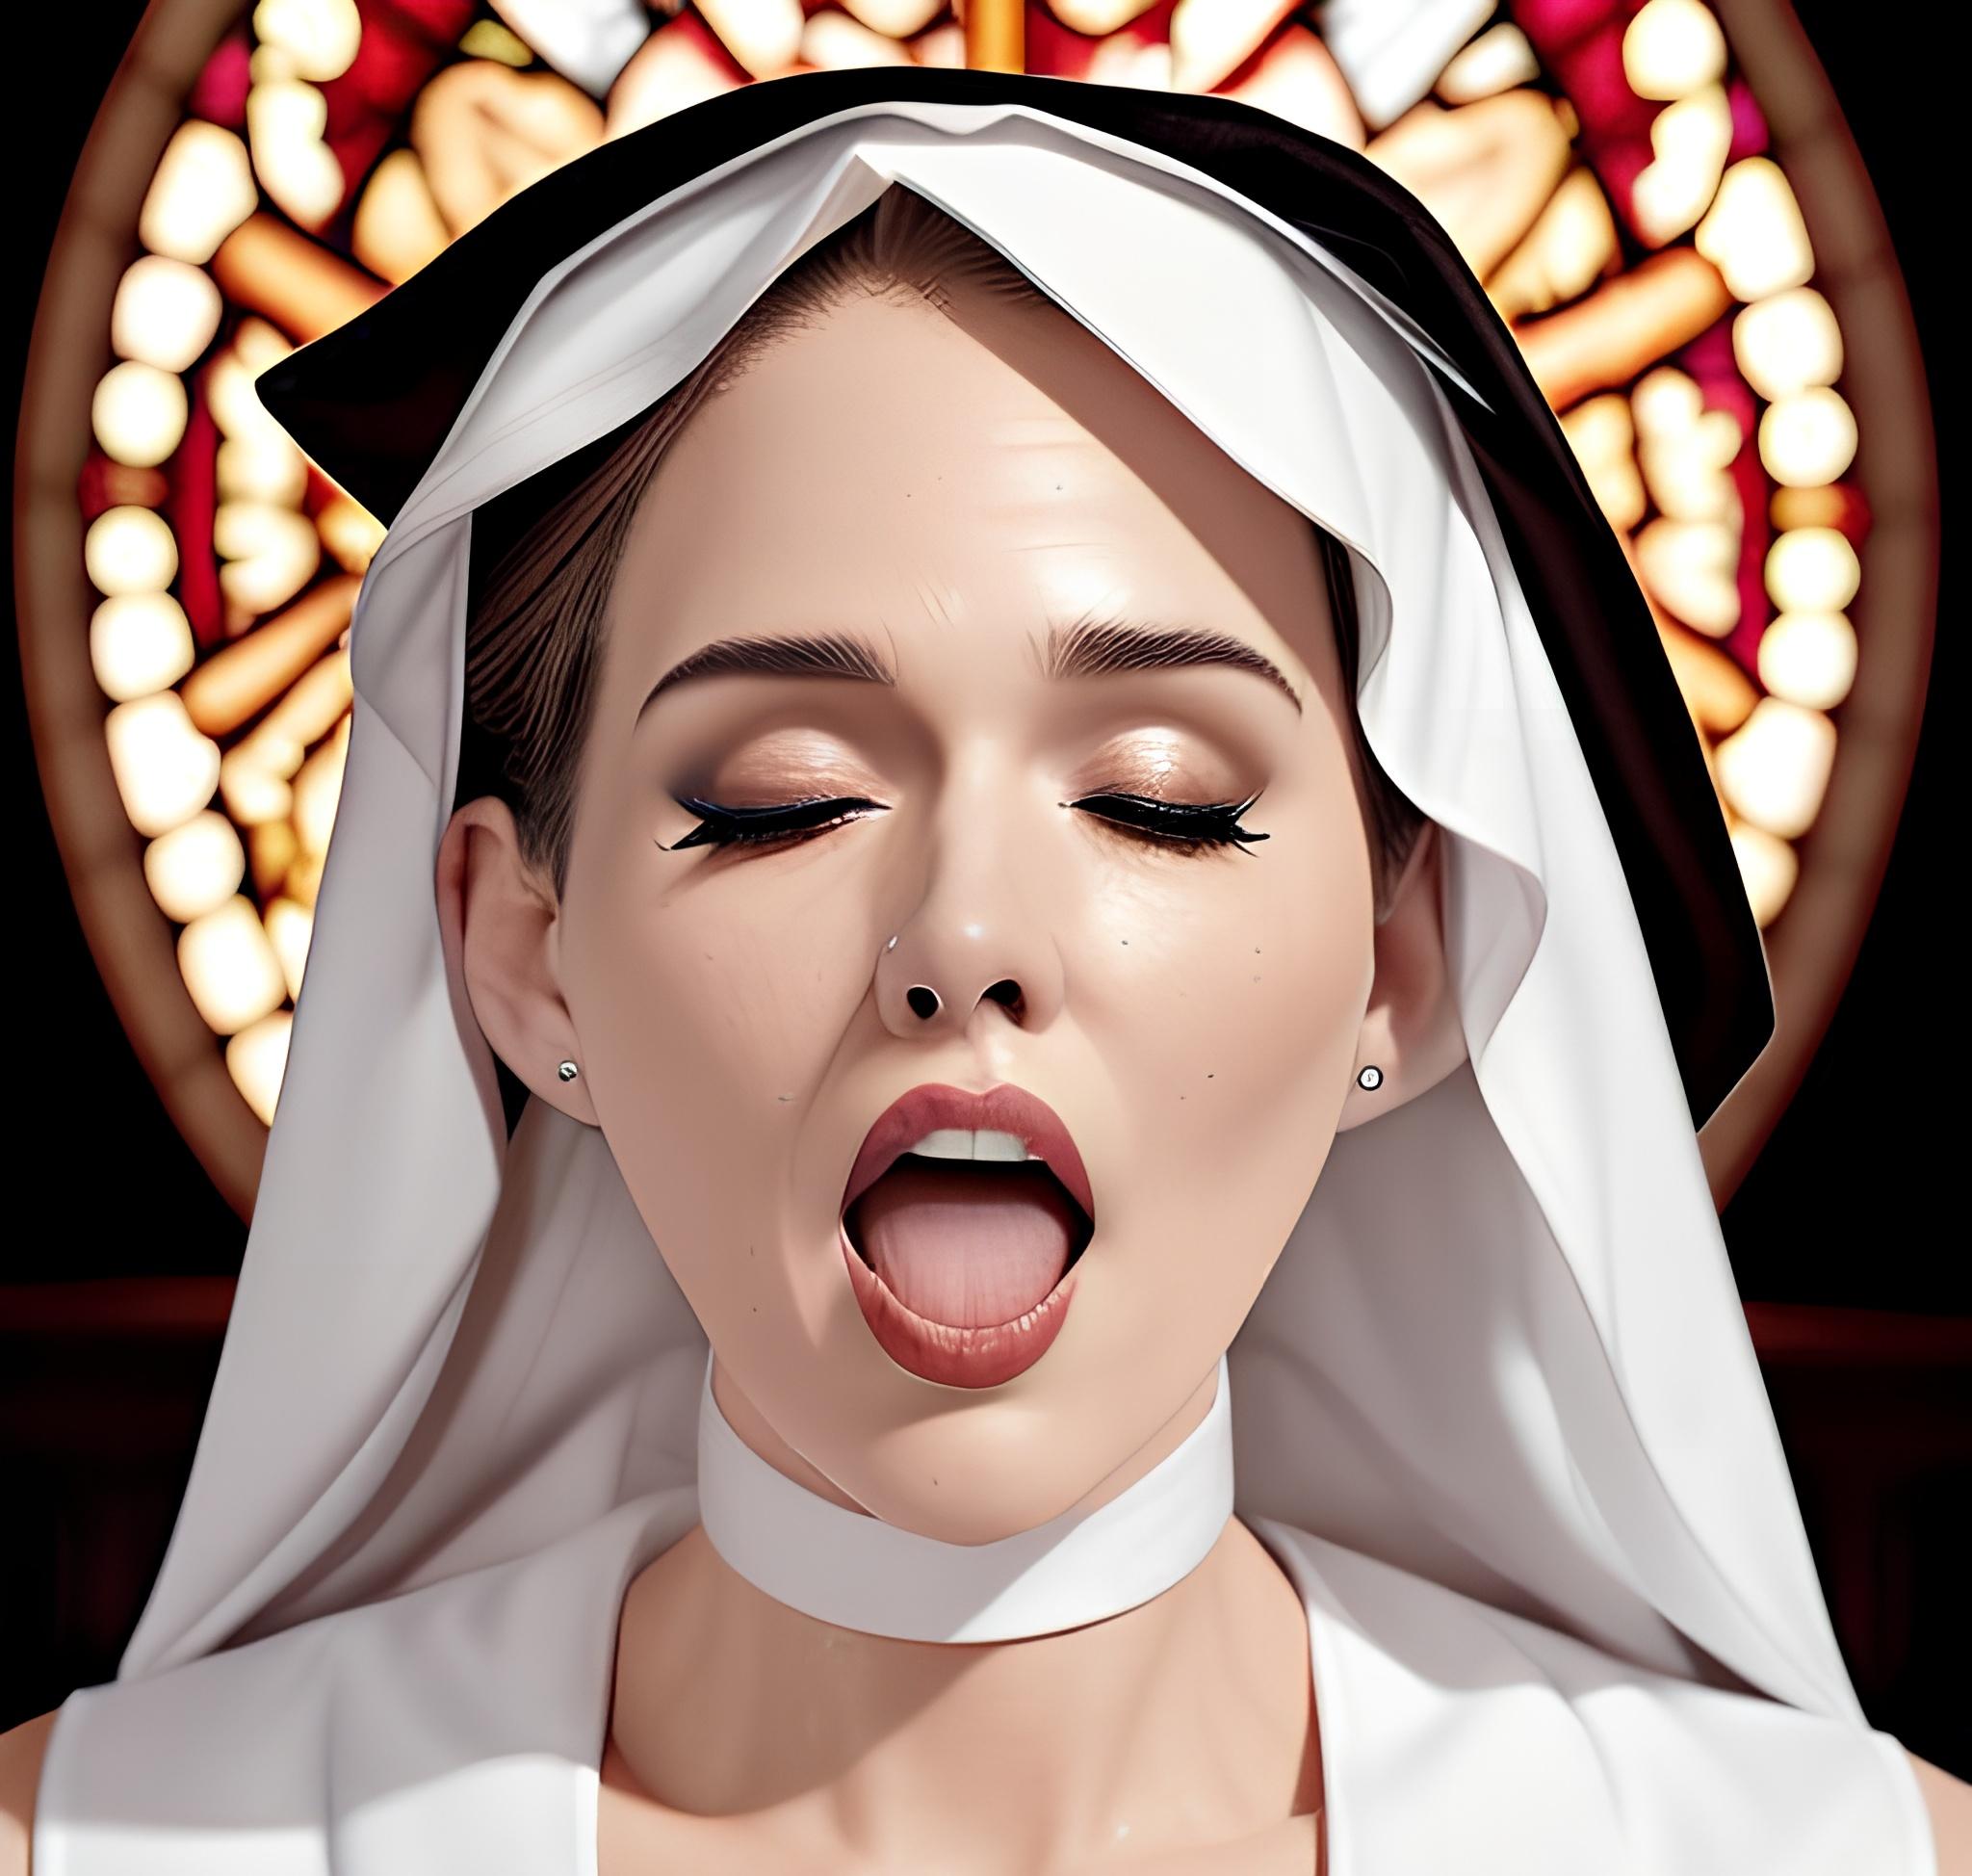 Let the church bells ring, as I cum and confess my sins to the 80yo nuns picture